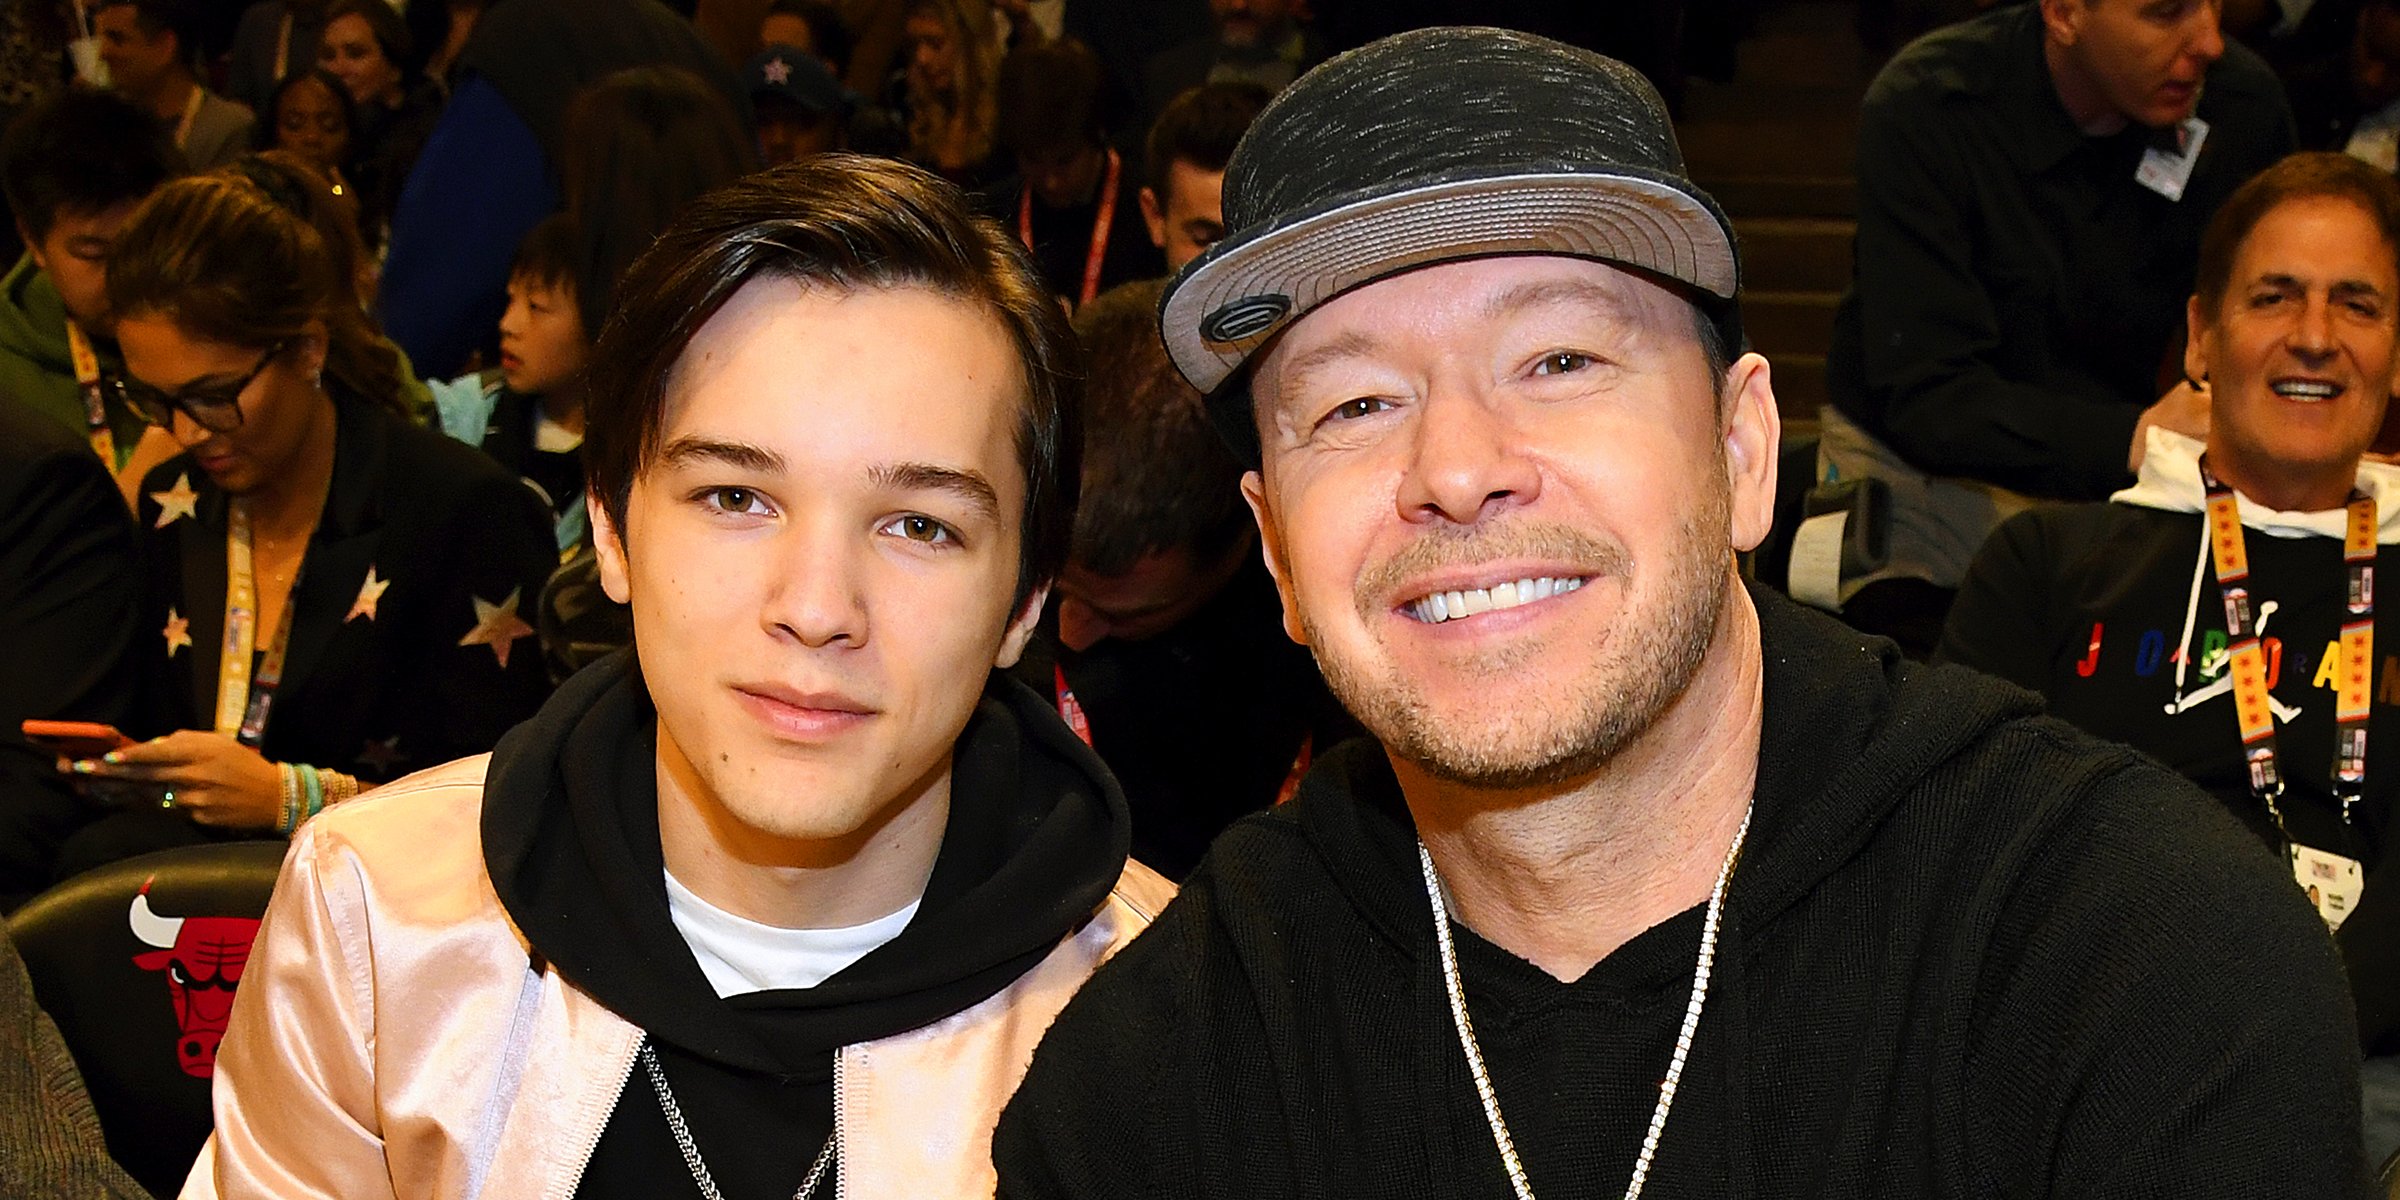 Elijah Wahlberg and Donnie Wahlberg. | Source: Getty Images